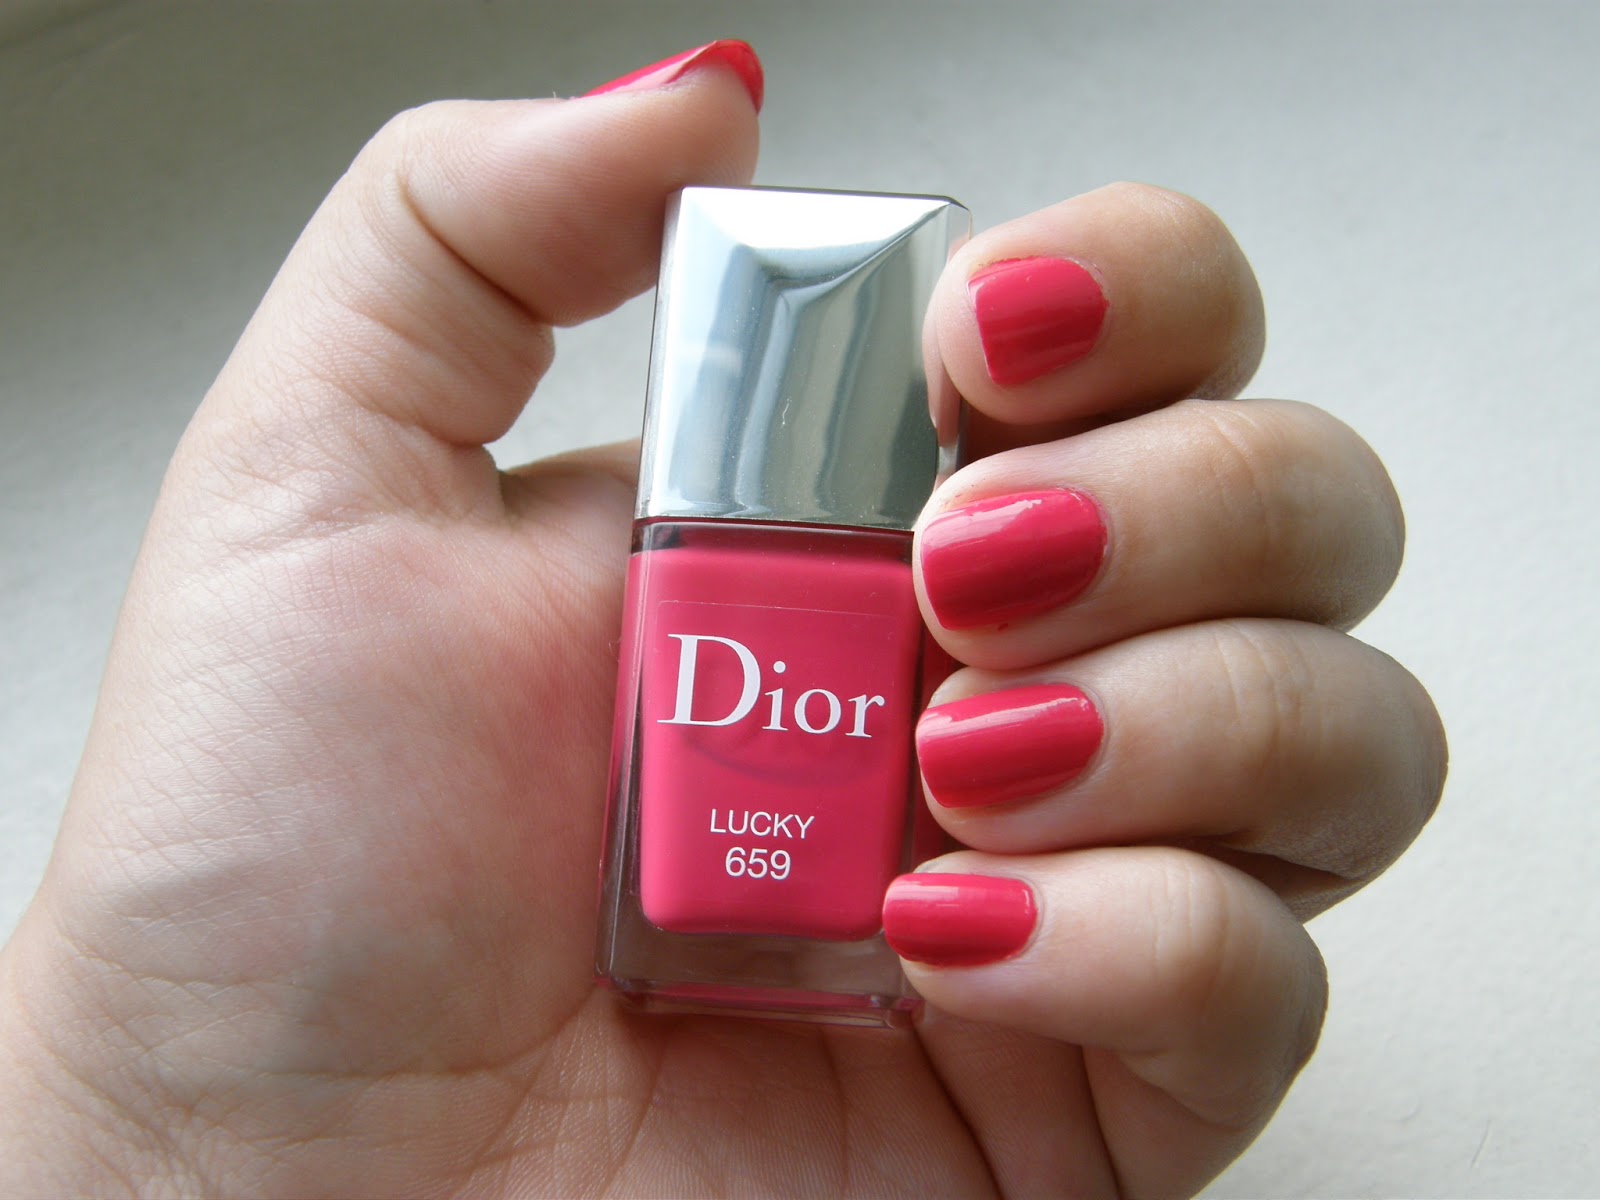 10. Dior Vernis Nail Lacquer in "New Look" - wide 8